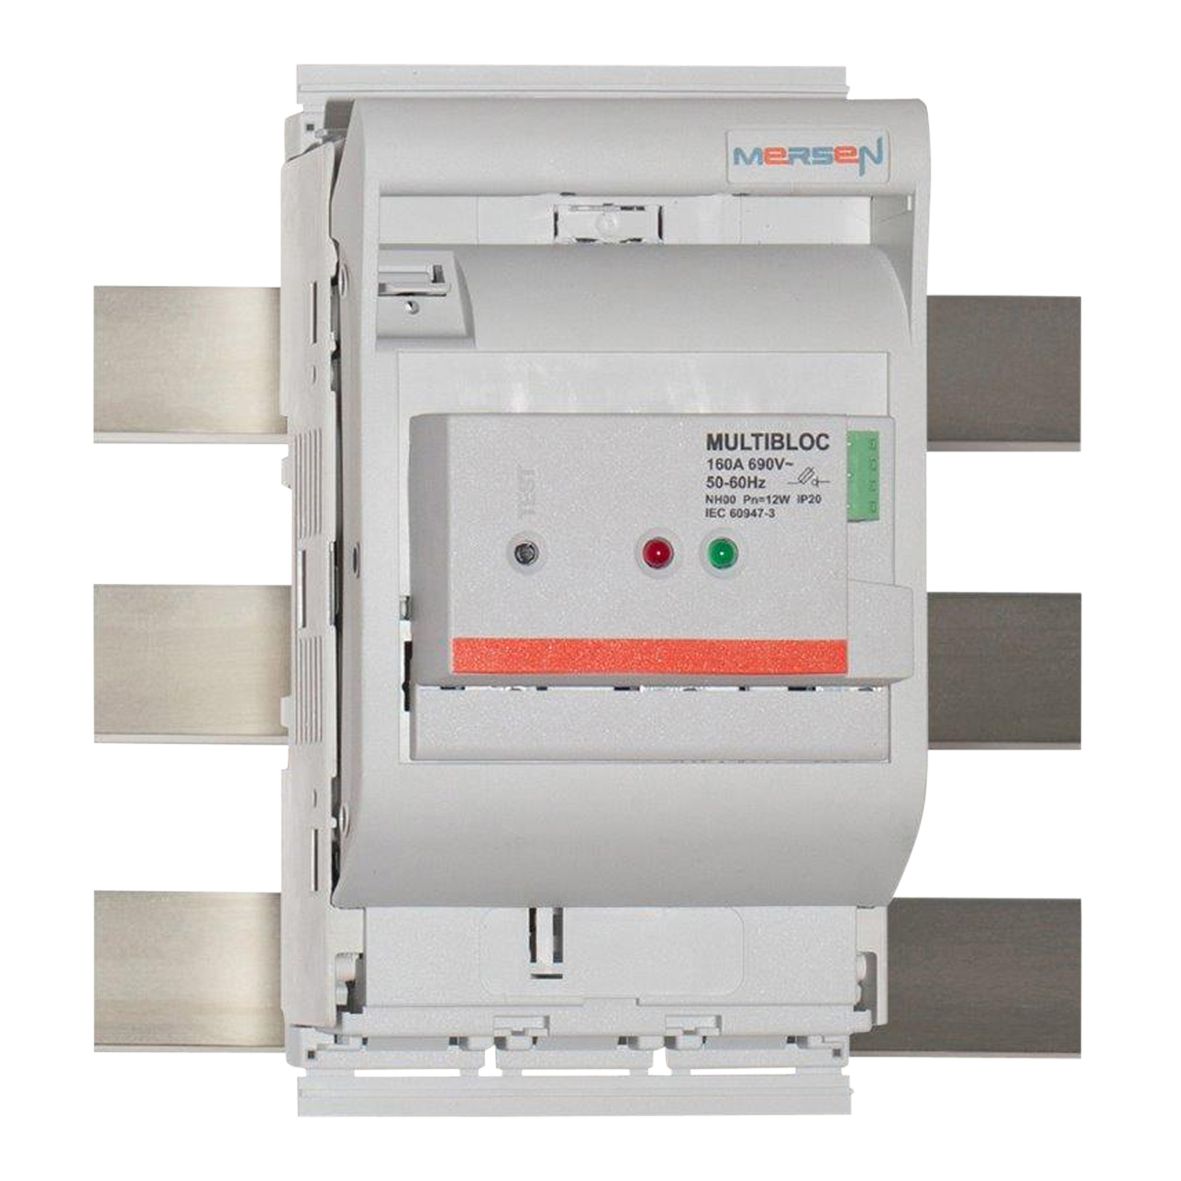 B1022995 - MULTIBLOC 00.RST9 size 00 / 160A, 3-pole electronic fuse monitoring installed